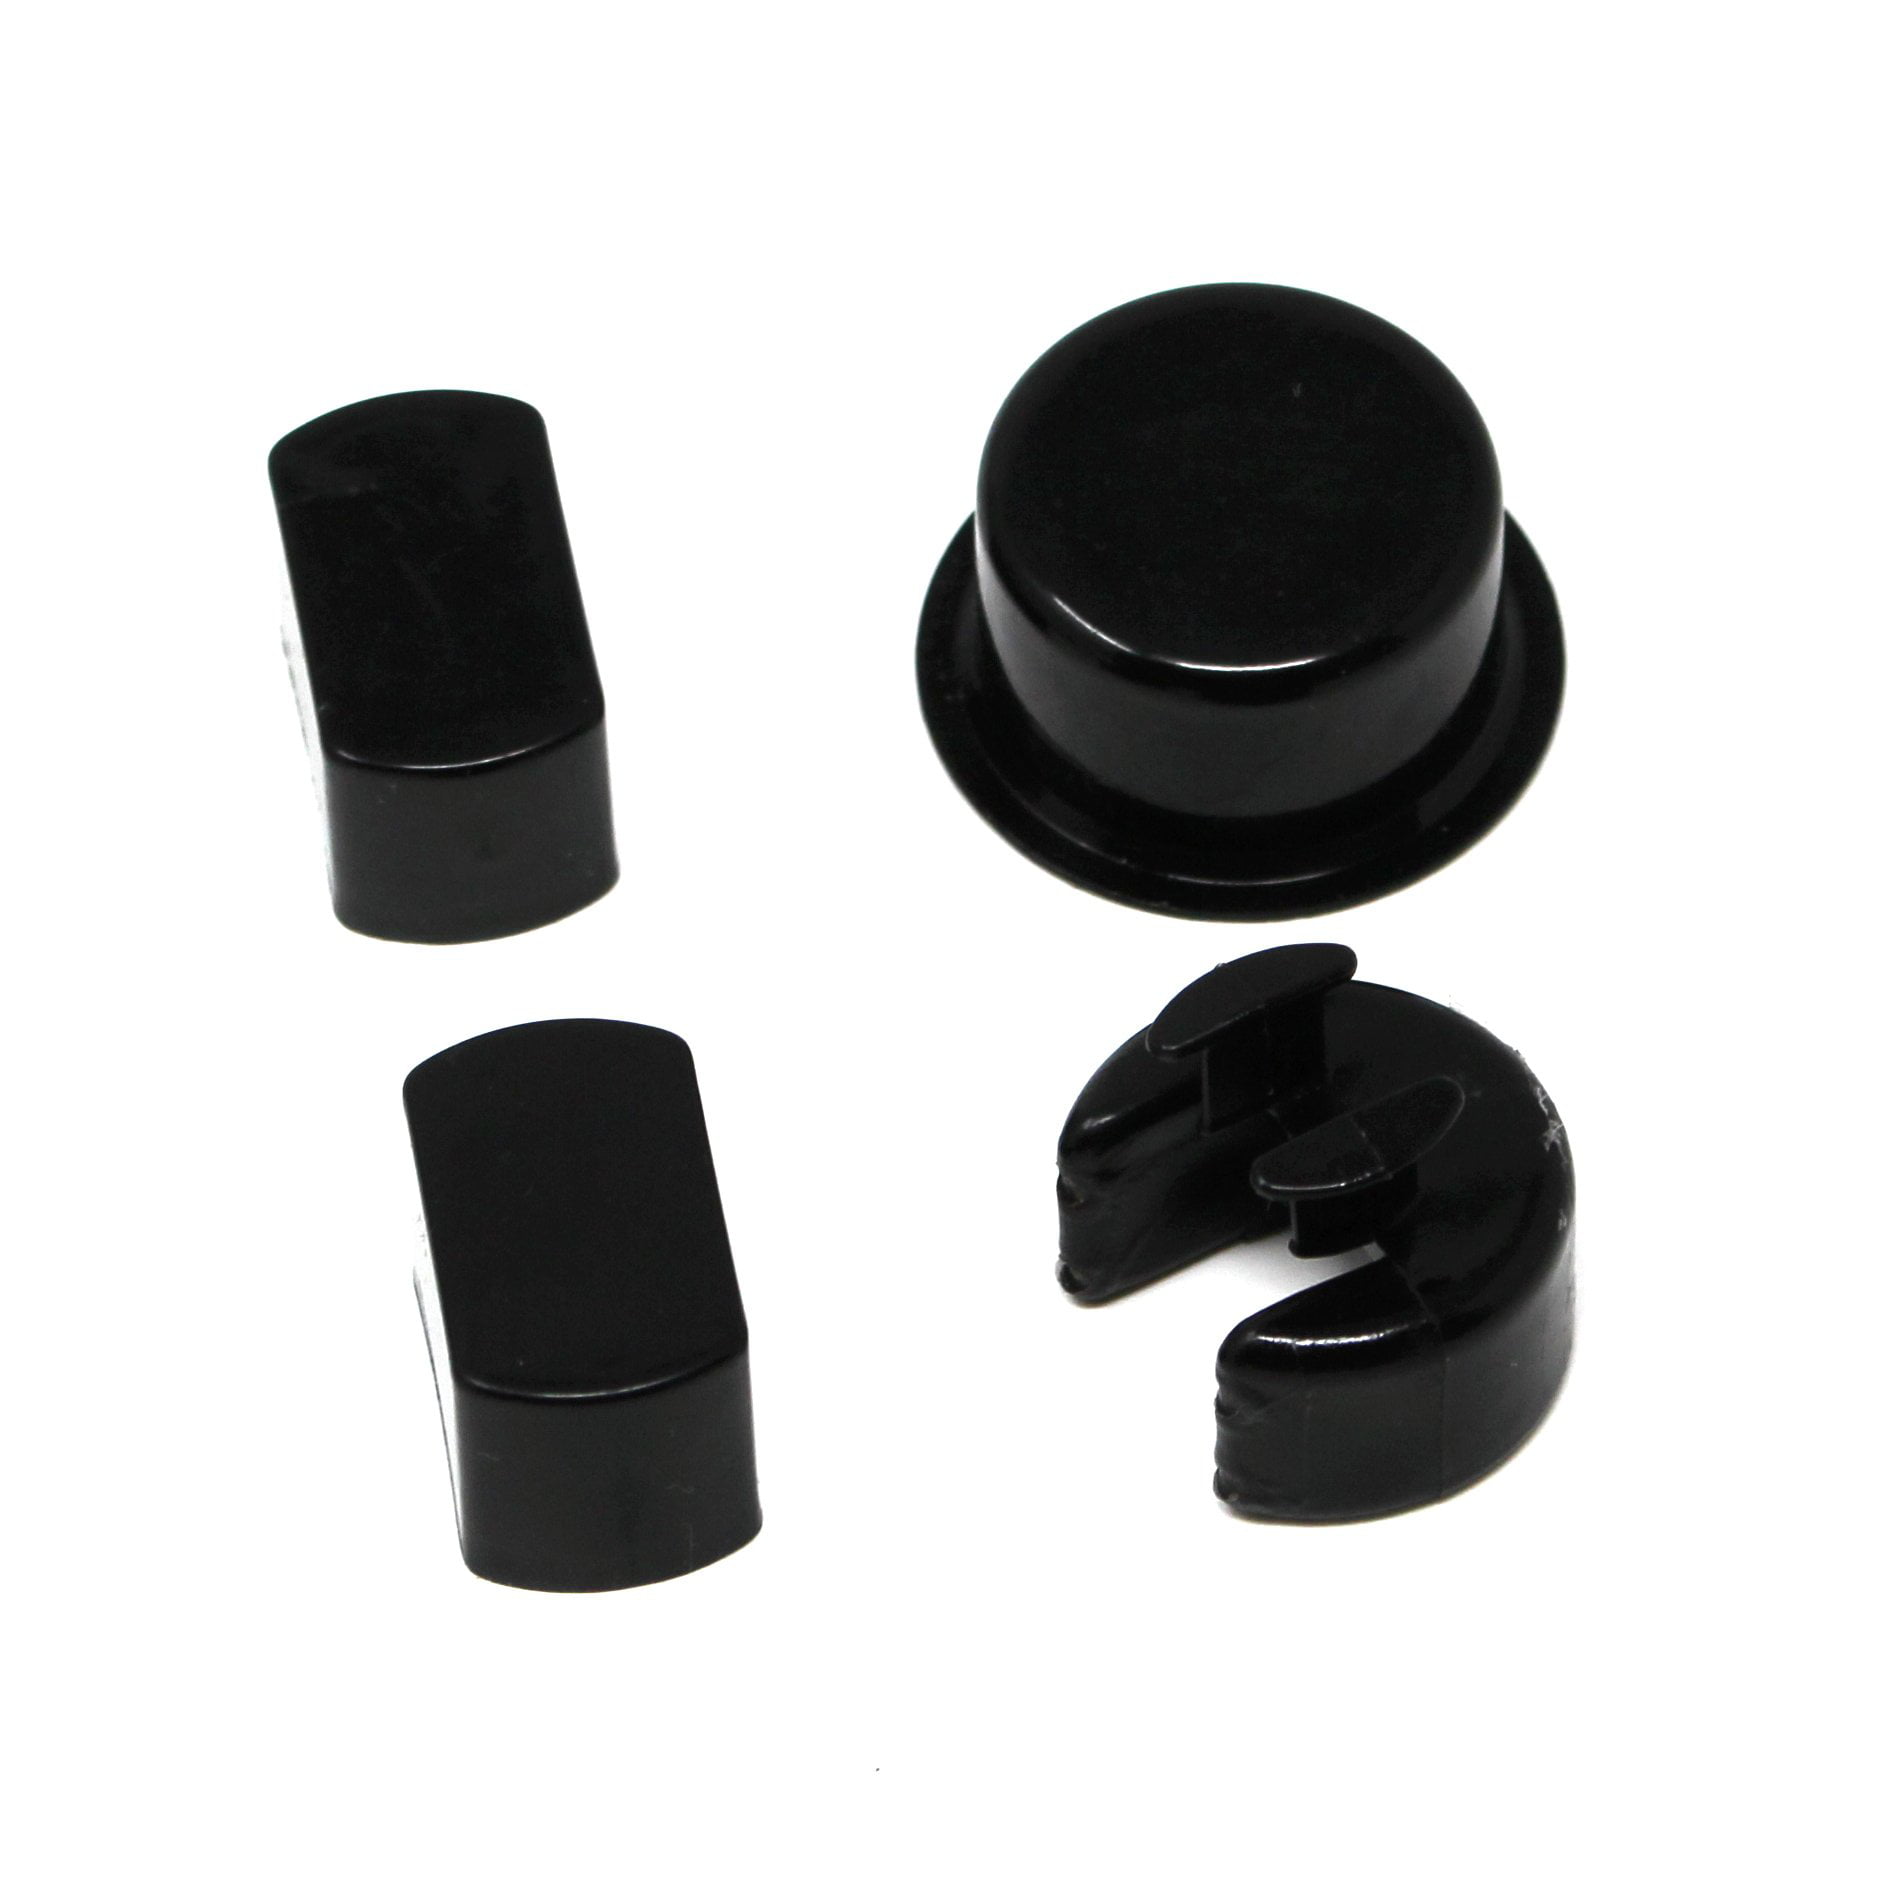 XtremeAmazing Tailgate Hinge Pivot Bushing Insert Kit for Dodge Ram and Ford F Series Trucks Left and Right 